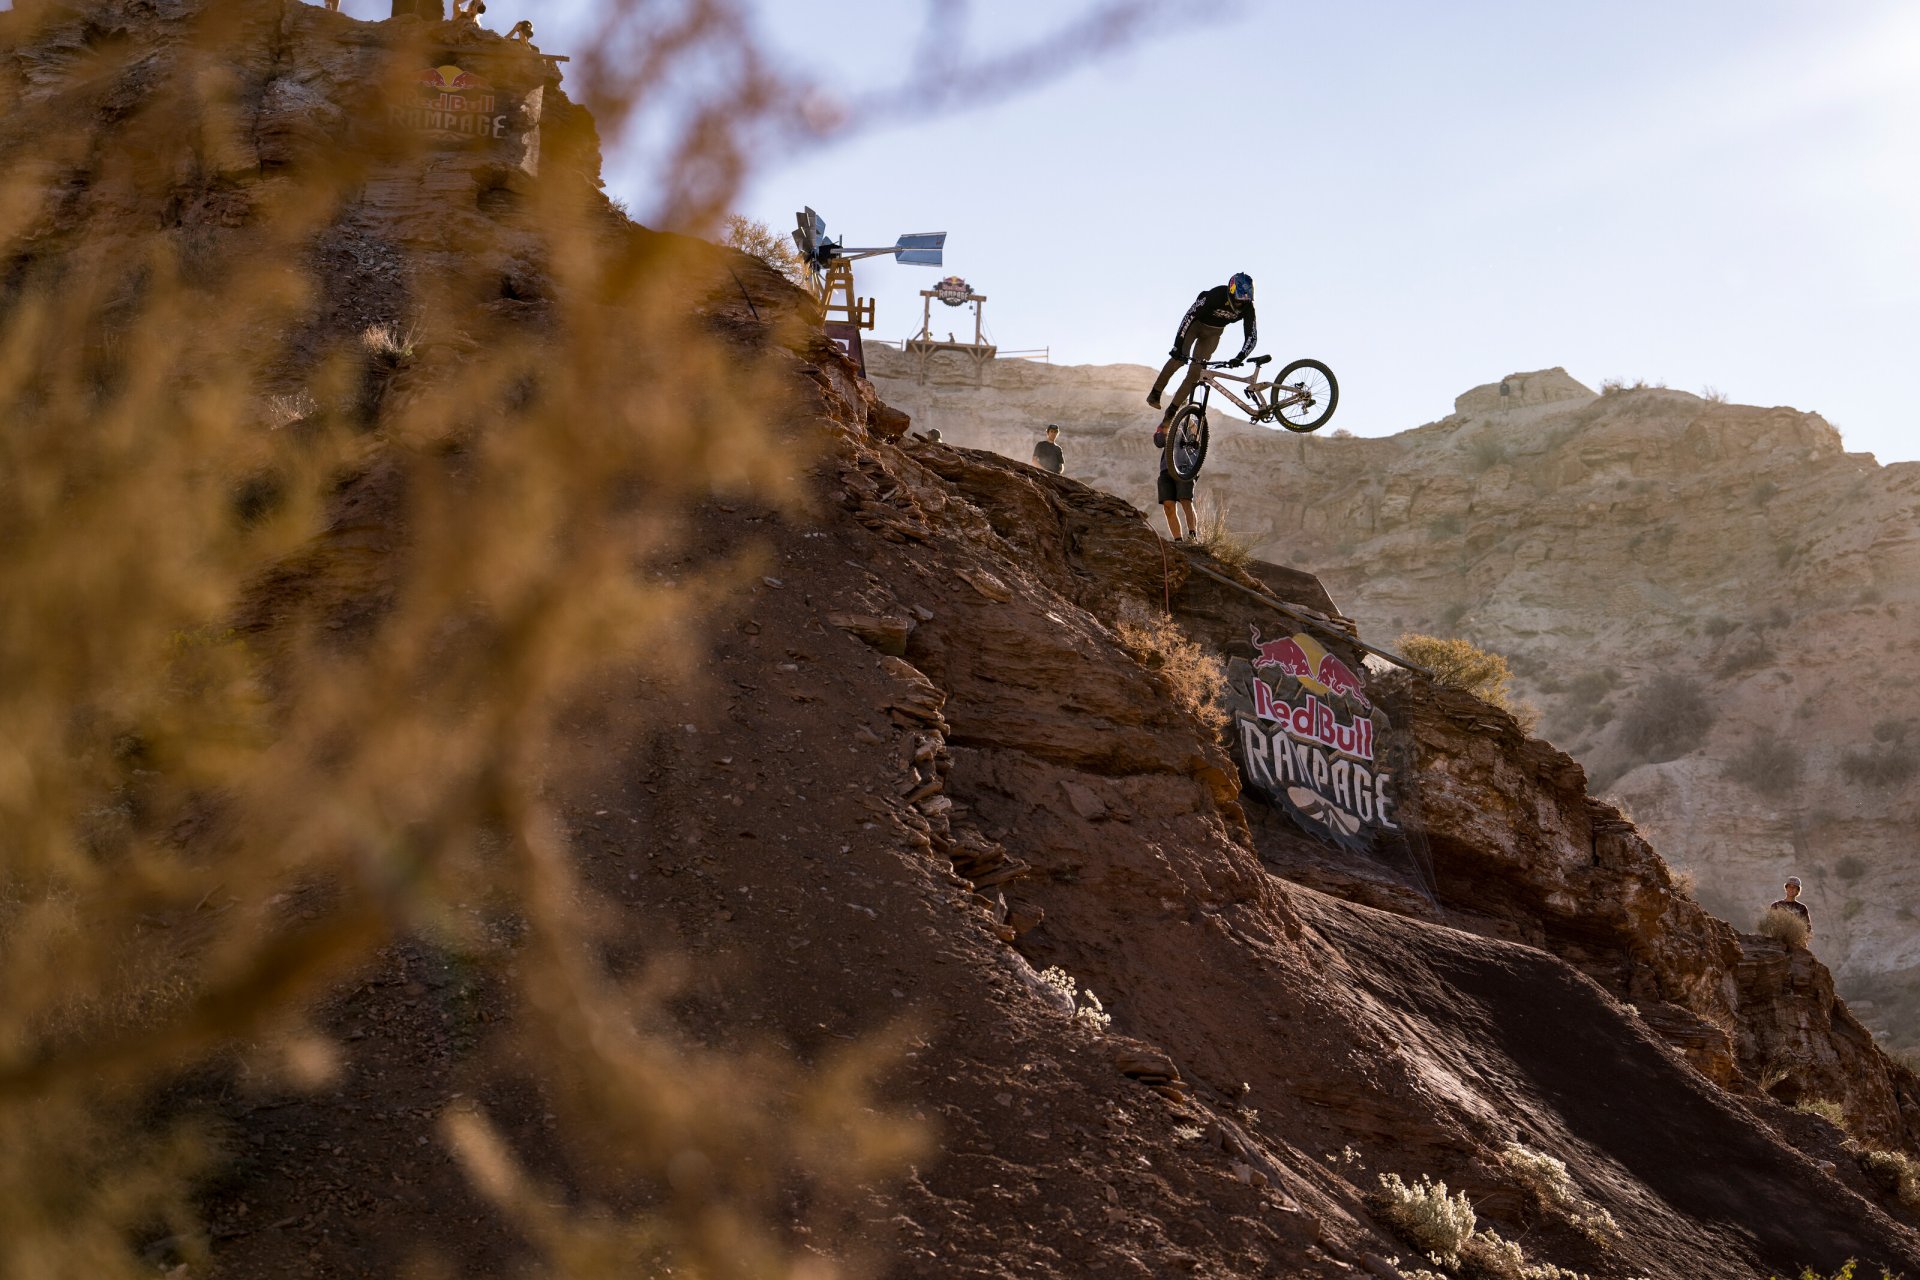 Why Red Bull Rampage is the Super Bowl of freeride mountain biking